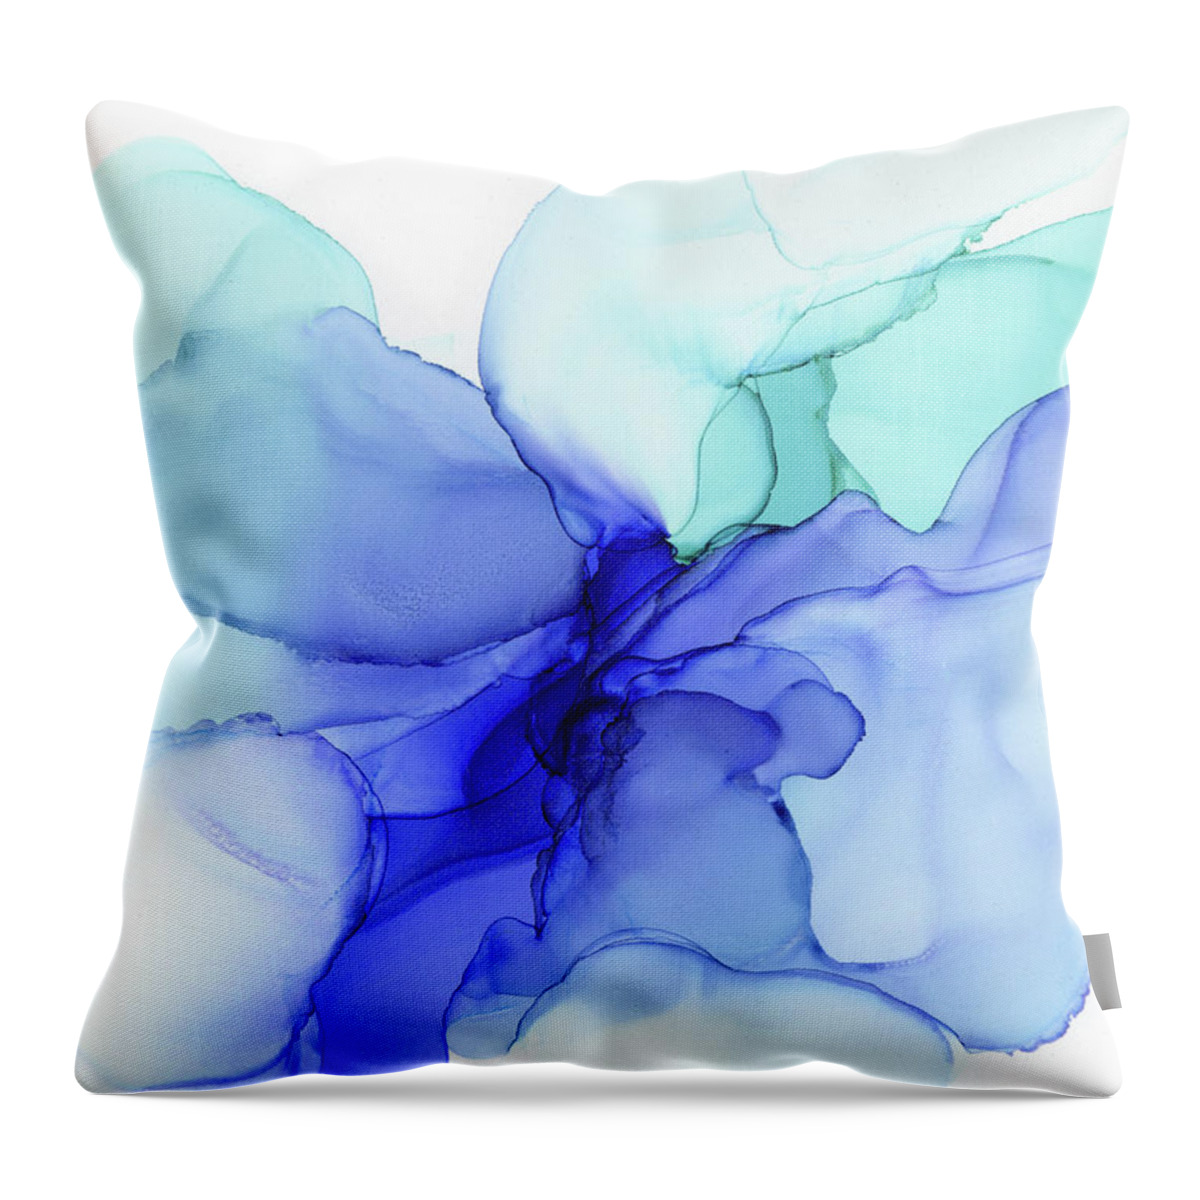 Blue Throw Pillow featuring the painting Blue Abstract Floral Ink by Olga Shvartsur